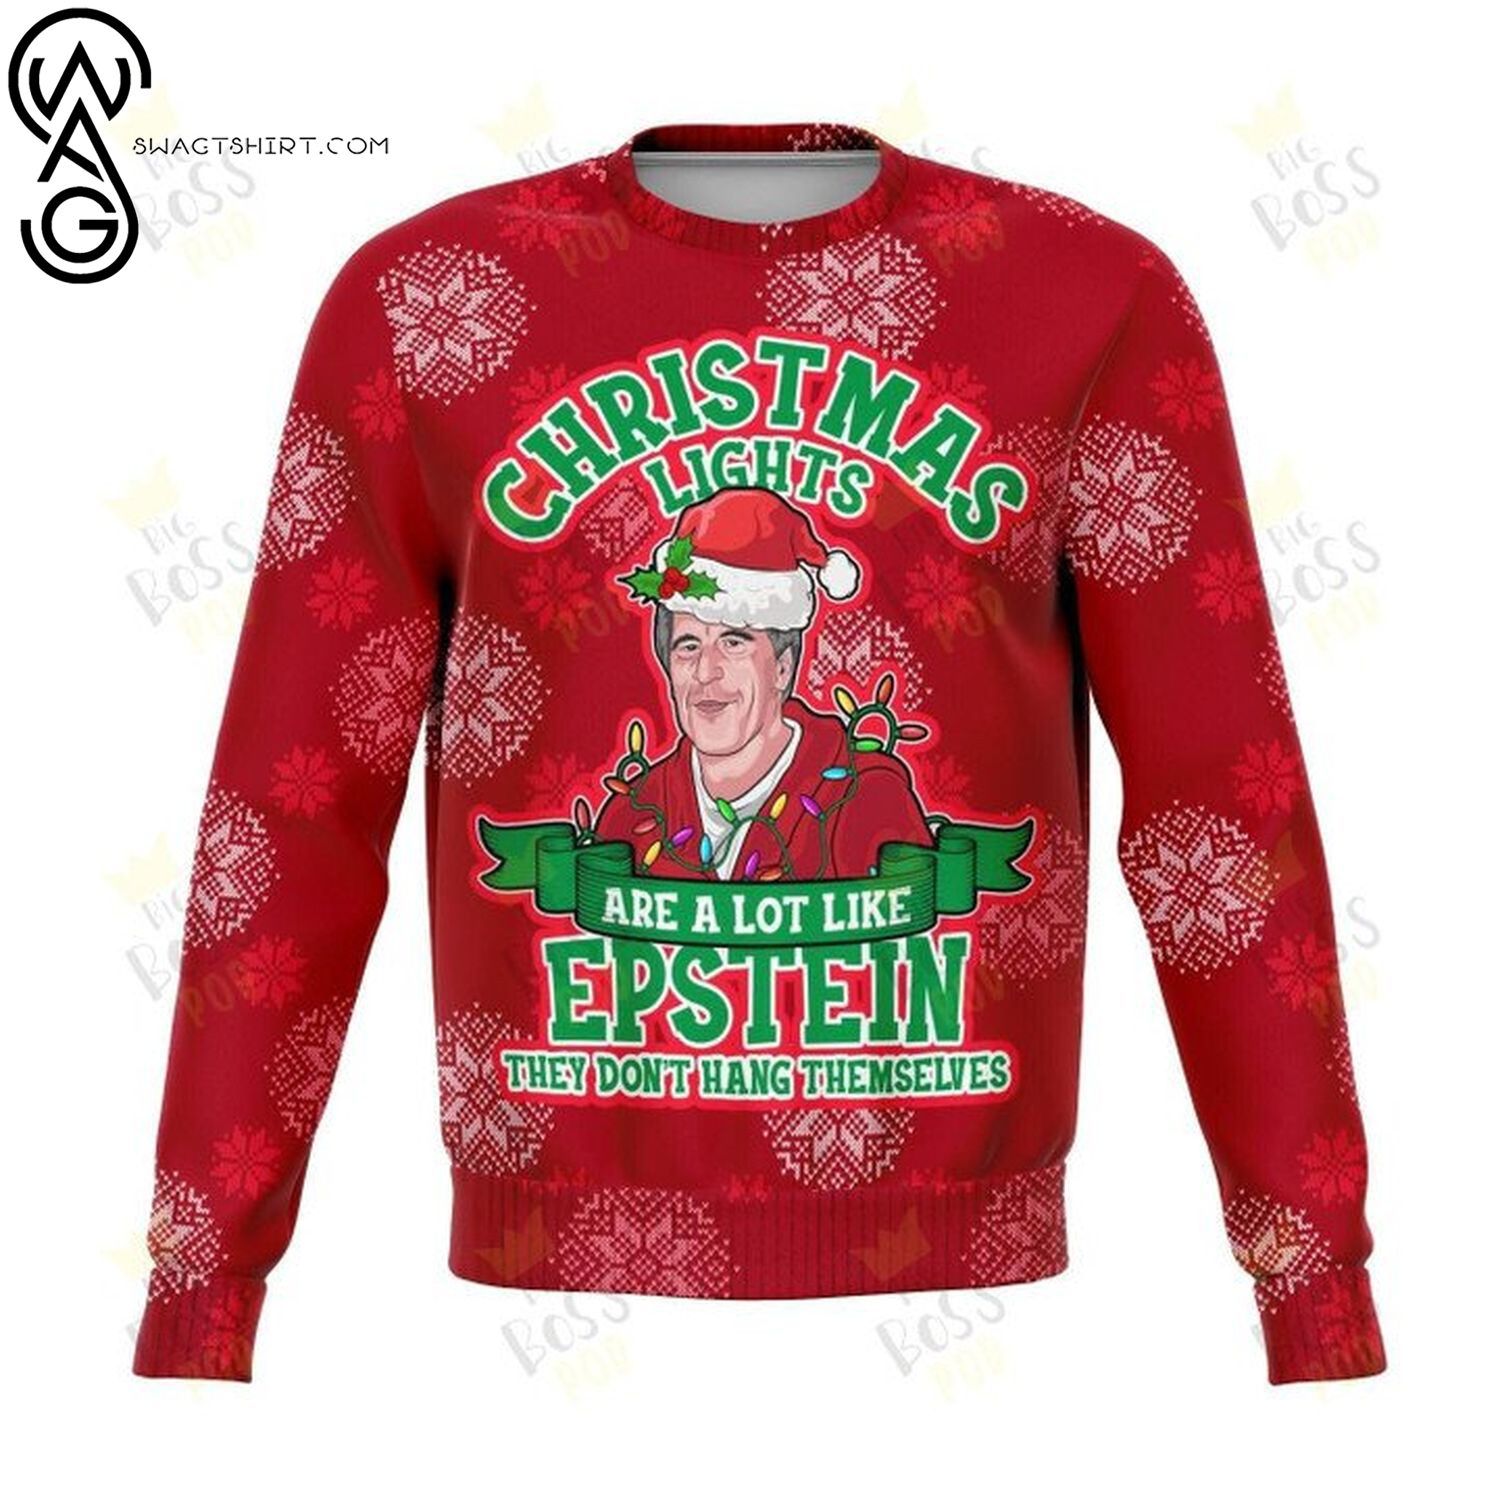 Christmas lights are a lot like epstein they don't hang themselves ugly christmas sweater(4) - Copy